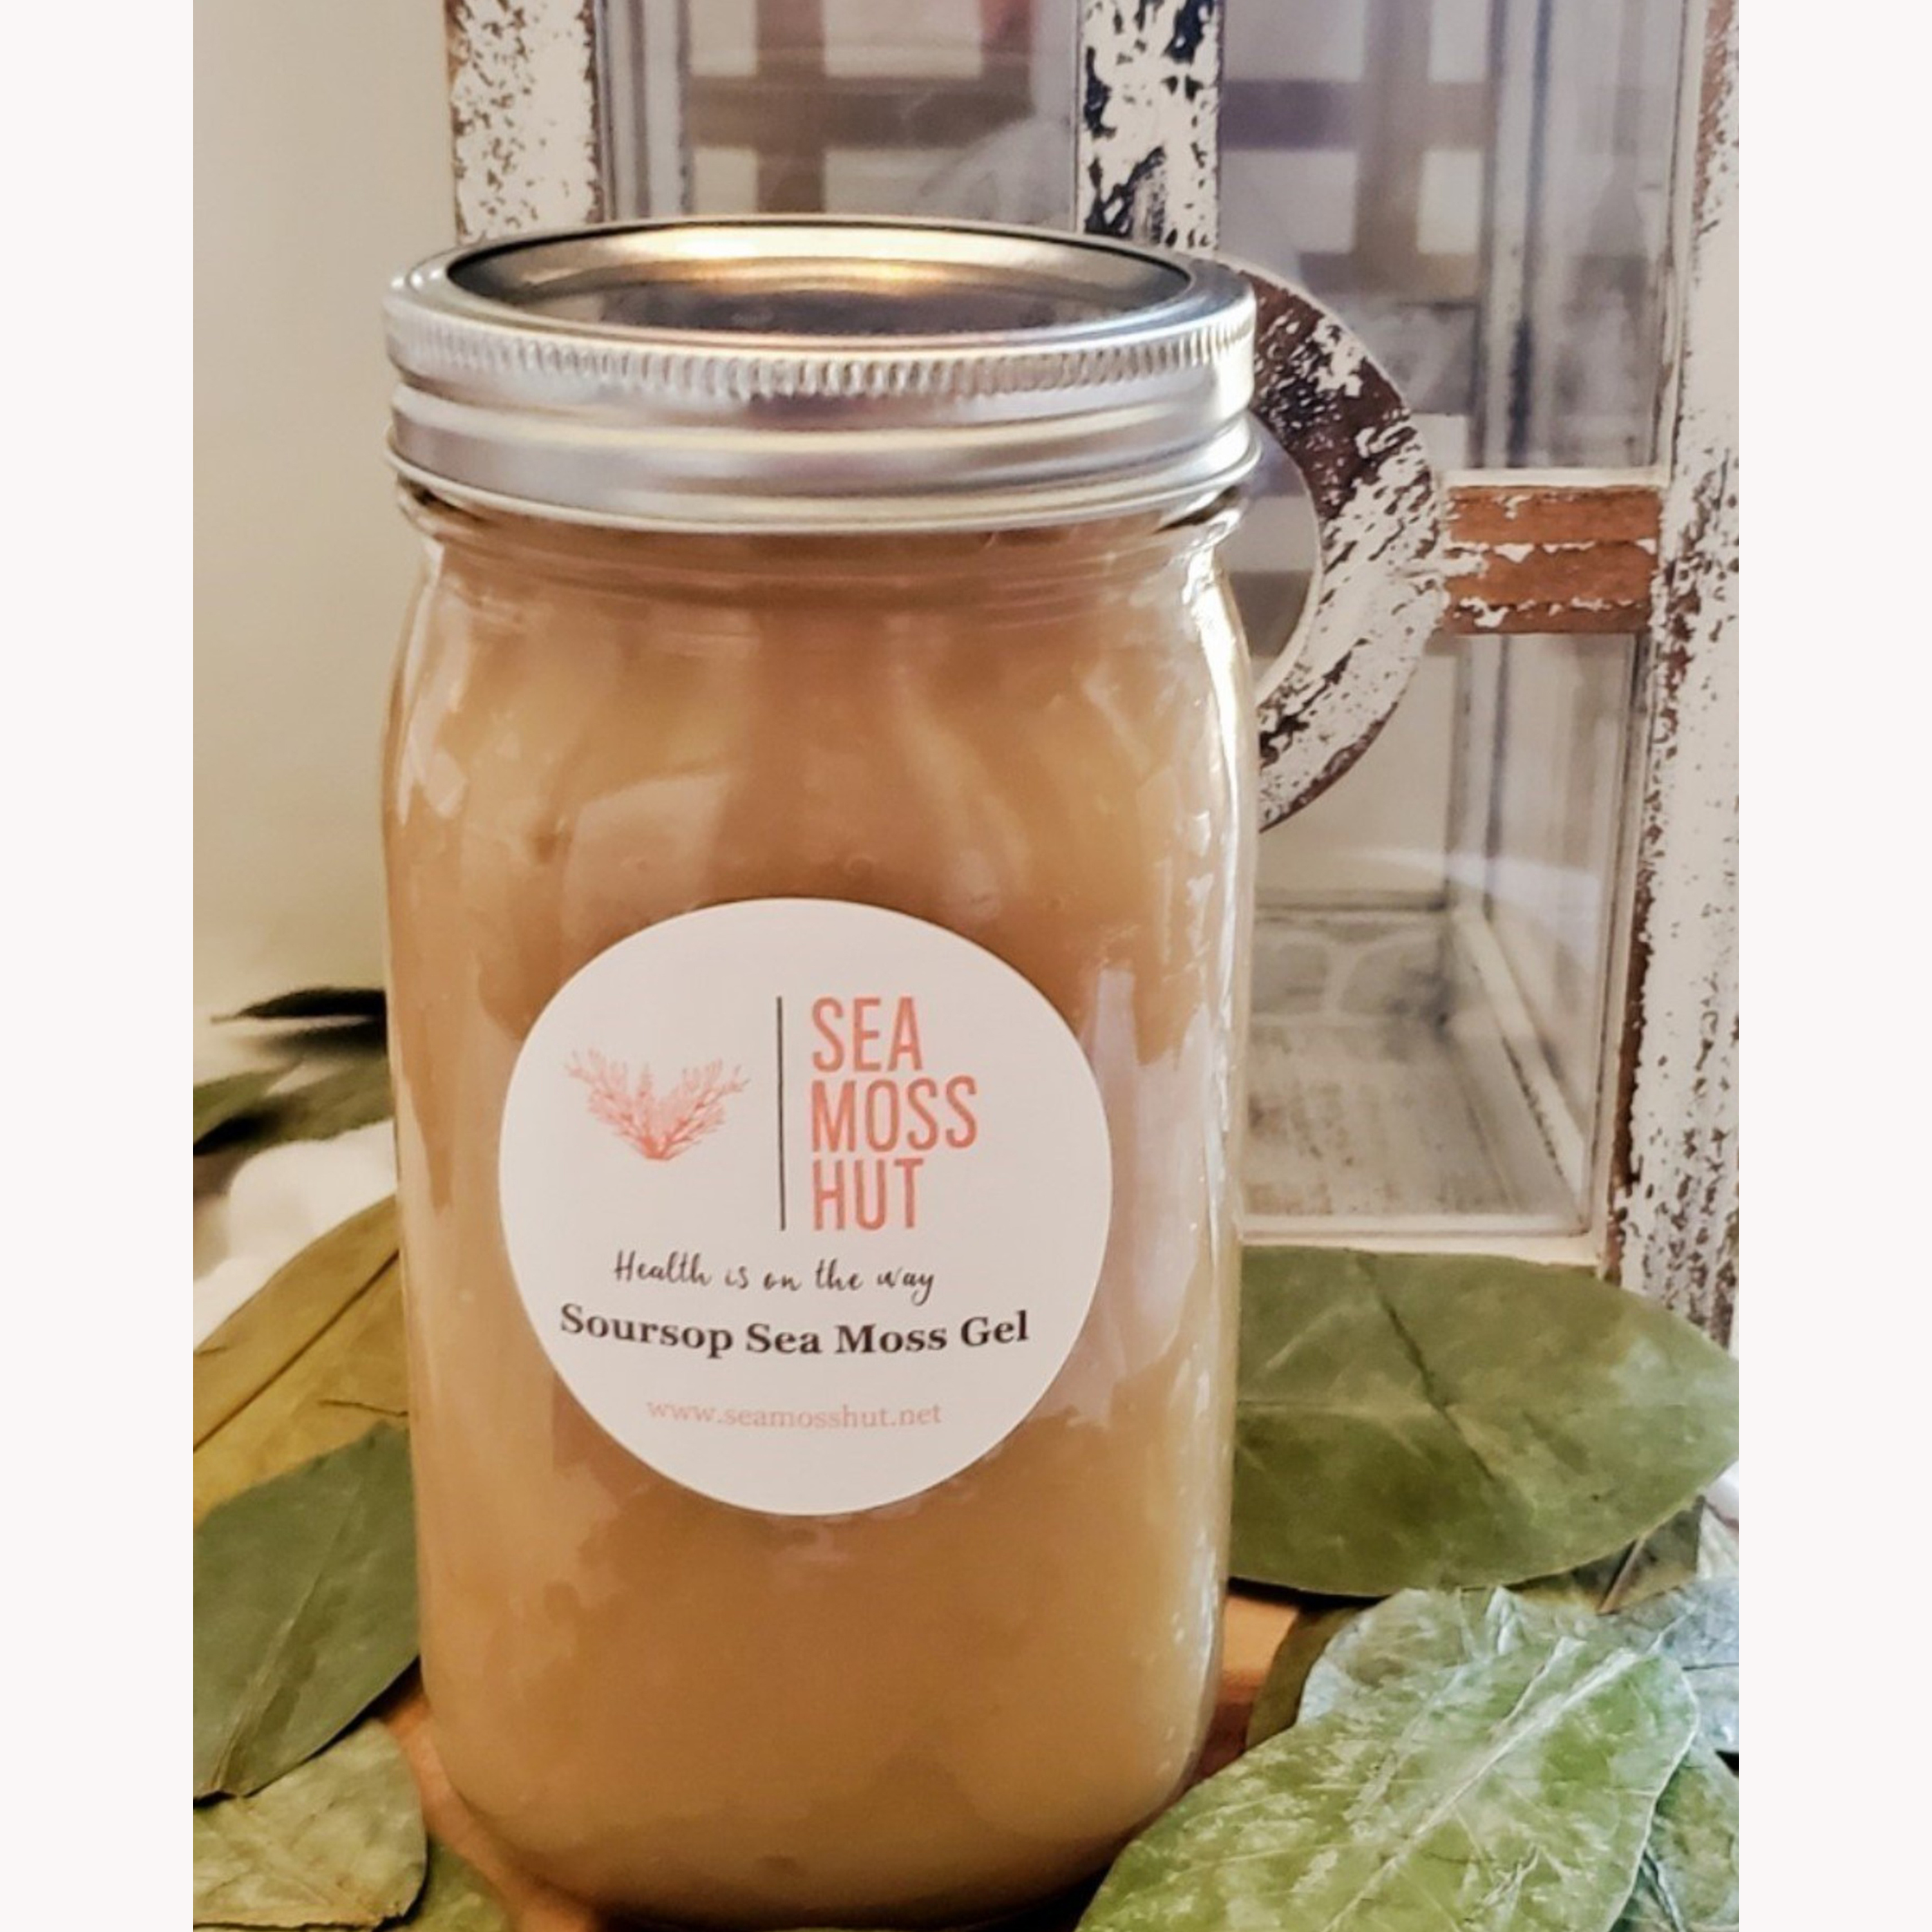 Sea Moss Infused With Soursop (leaf extract)